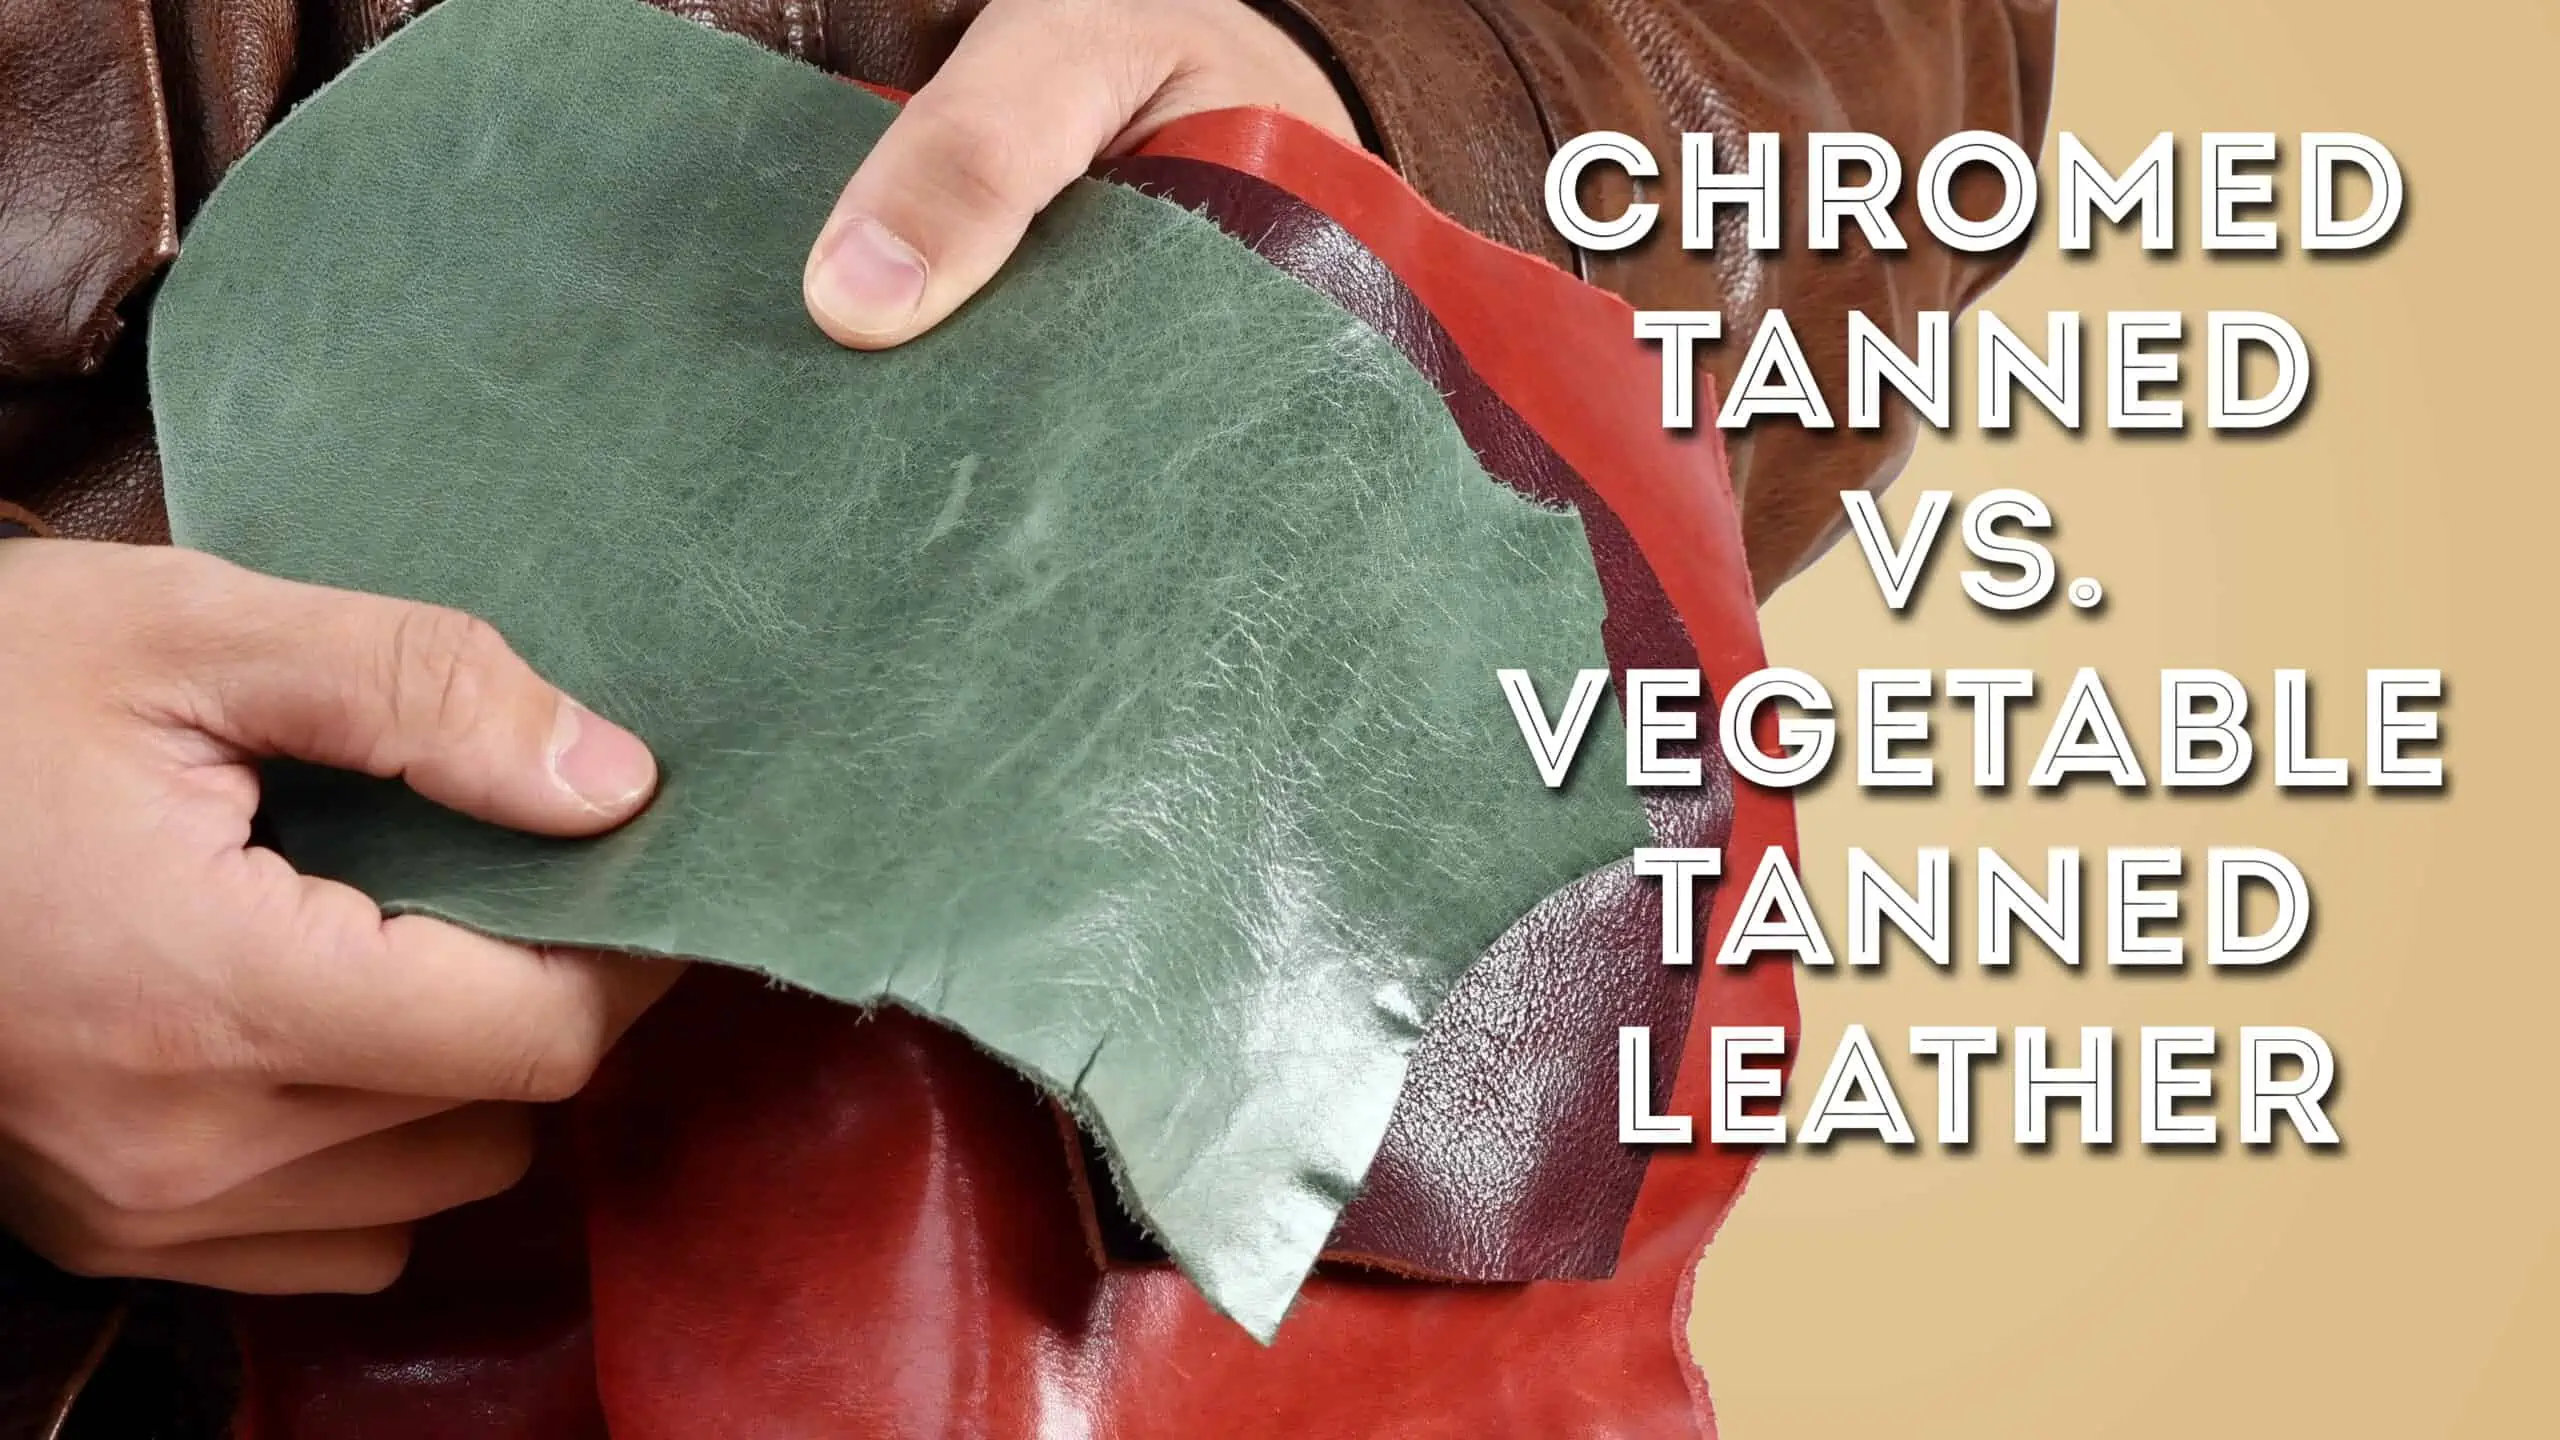 Chrome Tanned Vs. Vegetable Tanned Leather, Explained